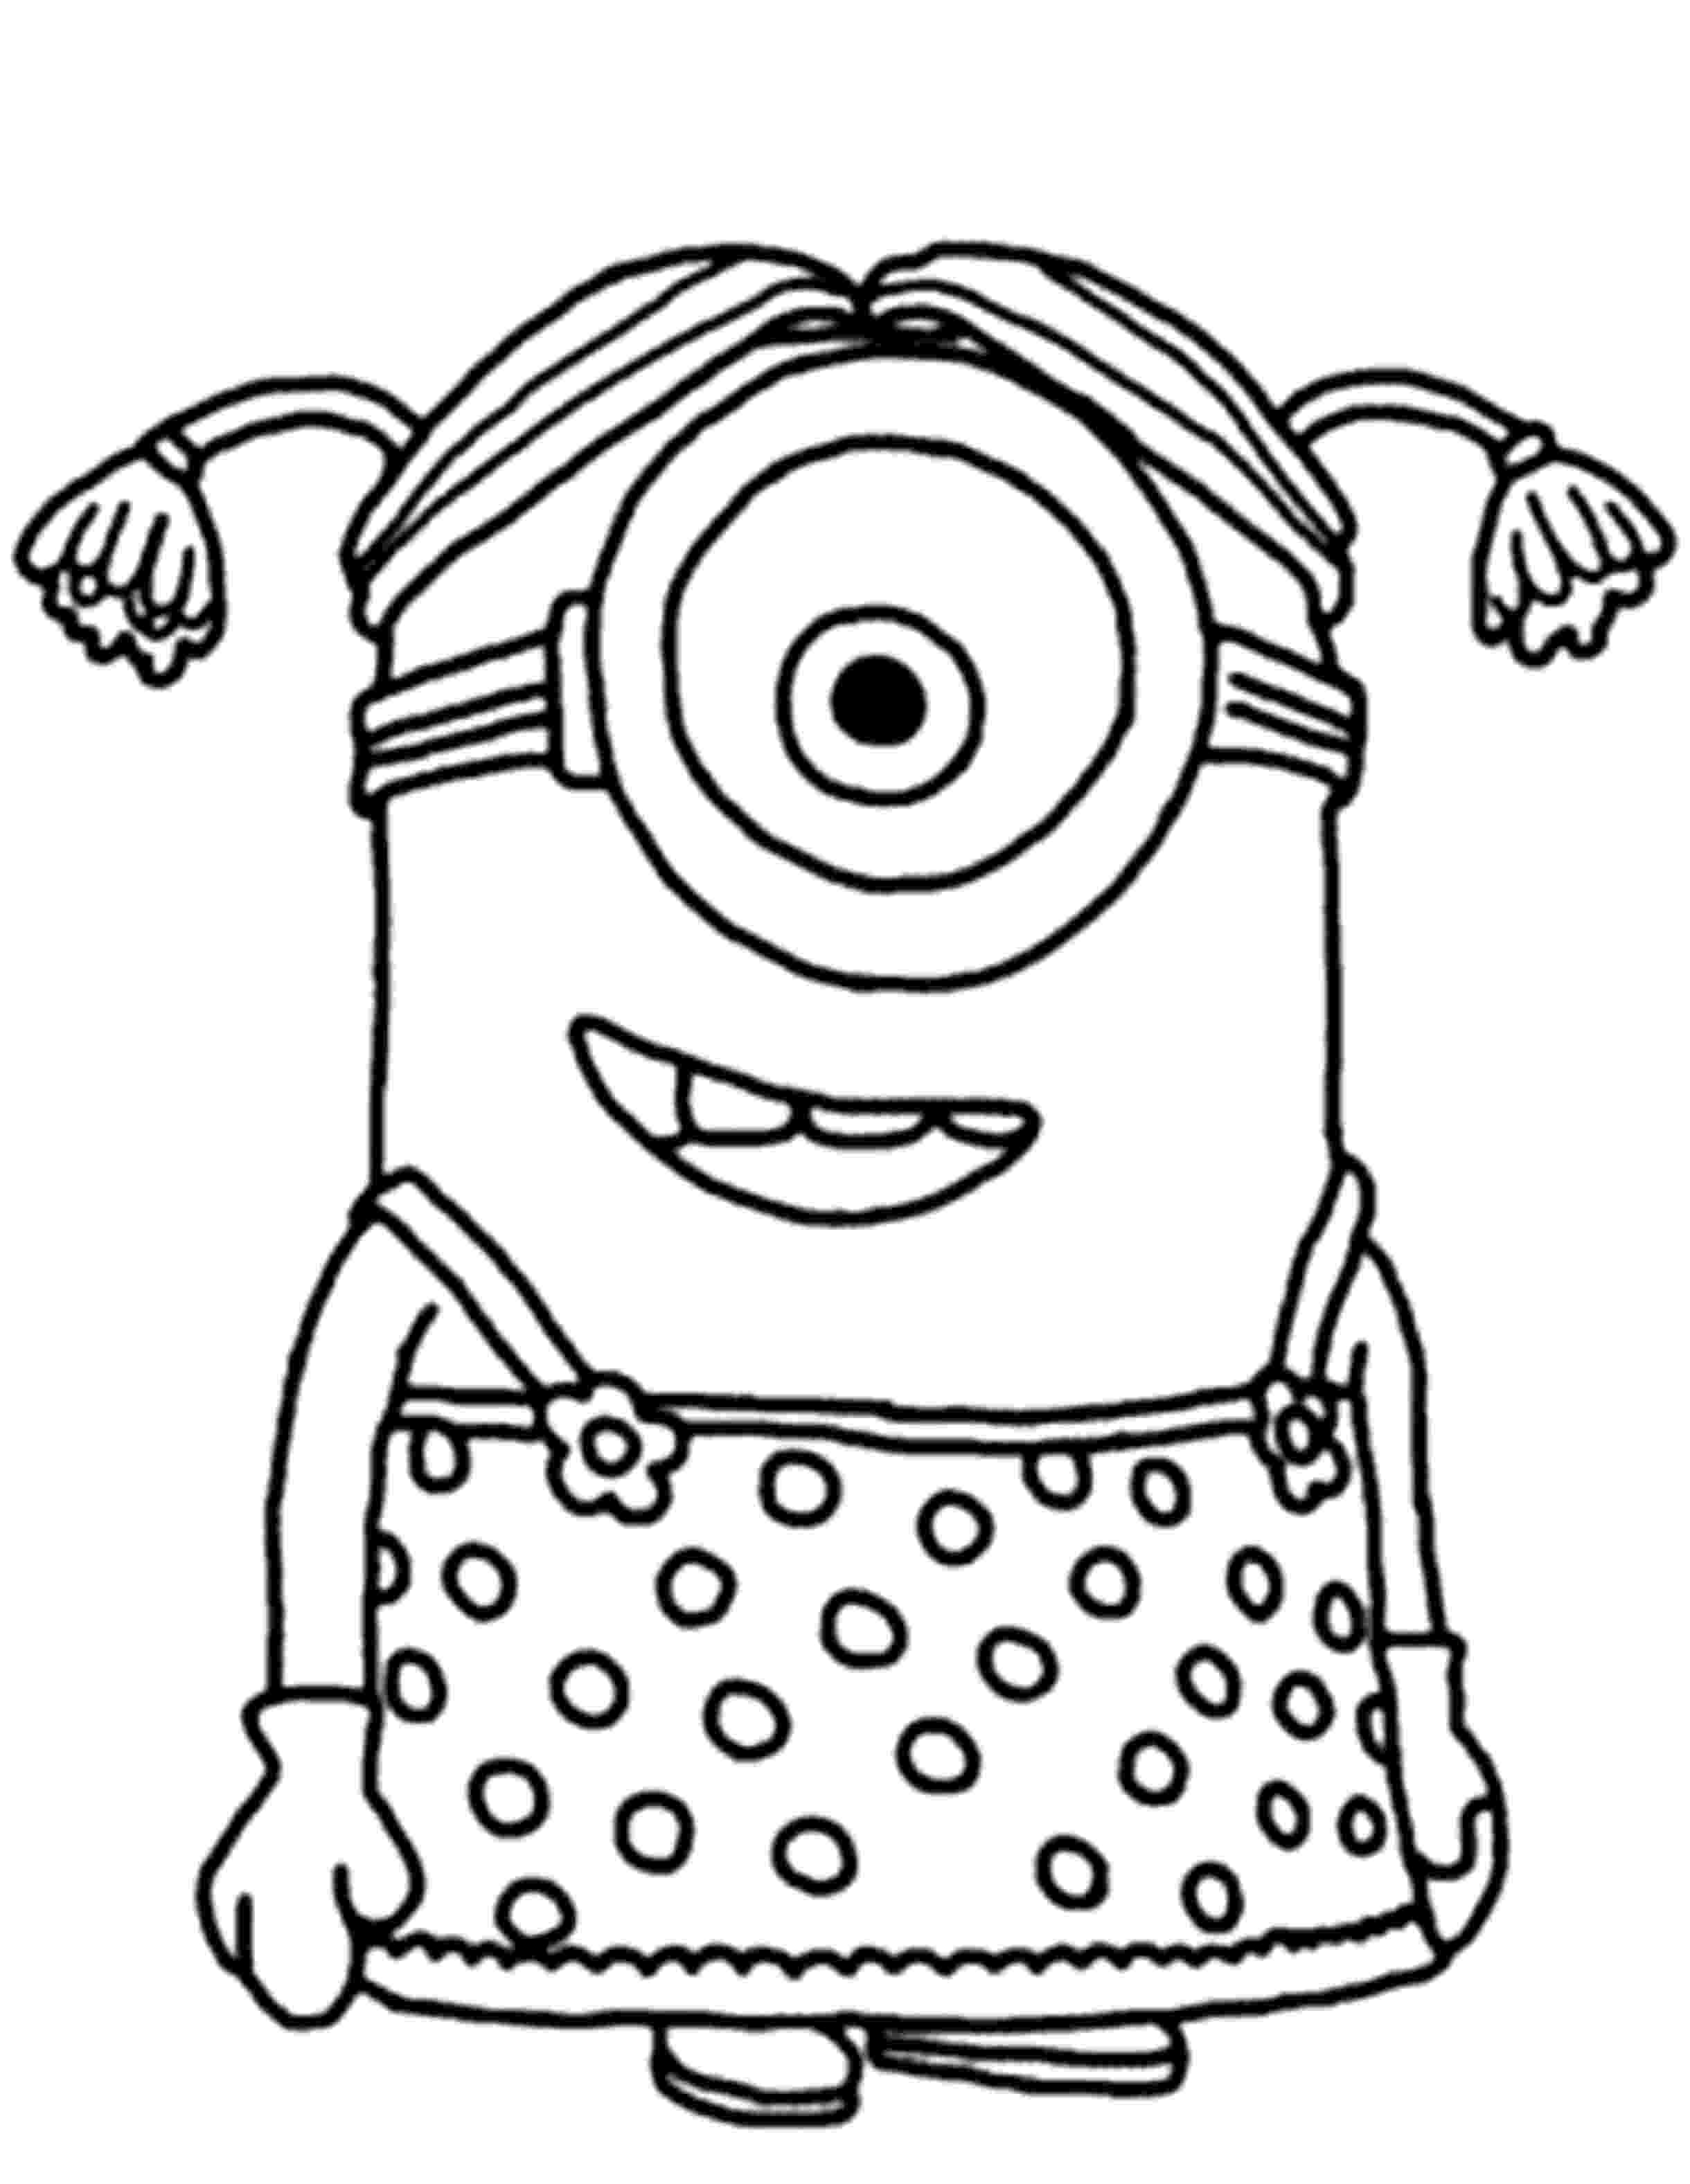 printable colouring pages minions free coloring pages printable pictures to color kids pages printable minions colouring 